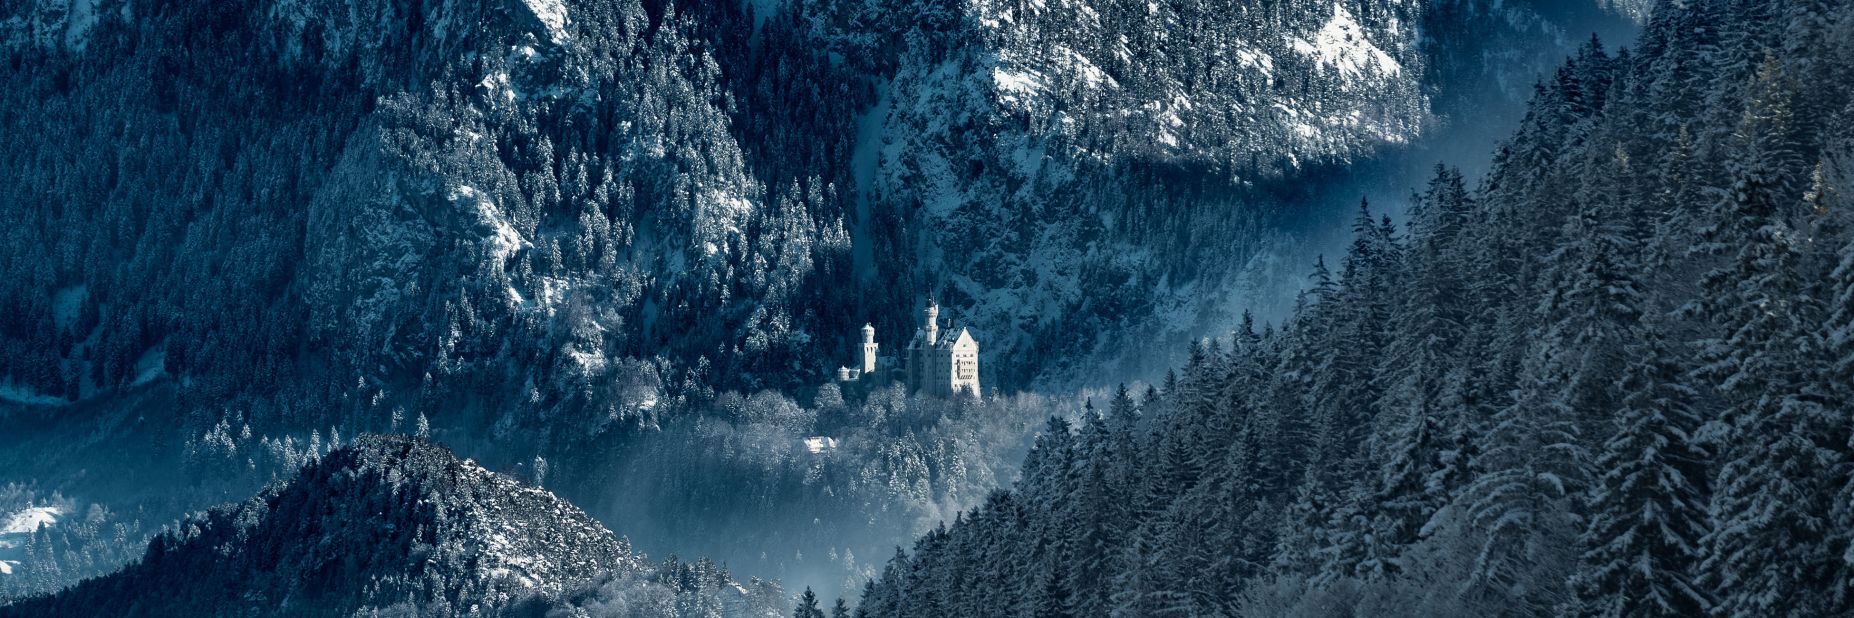 German photographer Dirk Vonten entered his image of Castle Neuschwanstein into the Sense of Place category. 